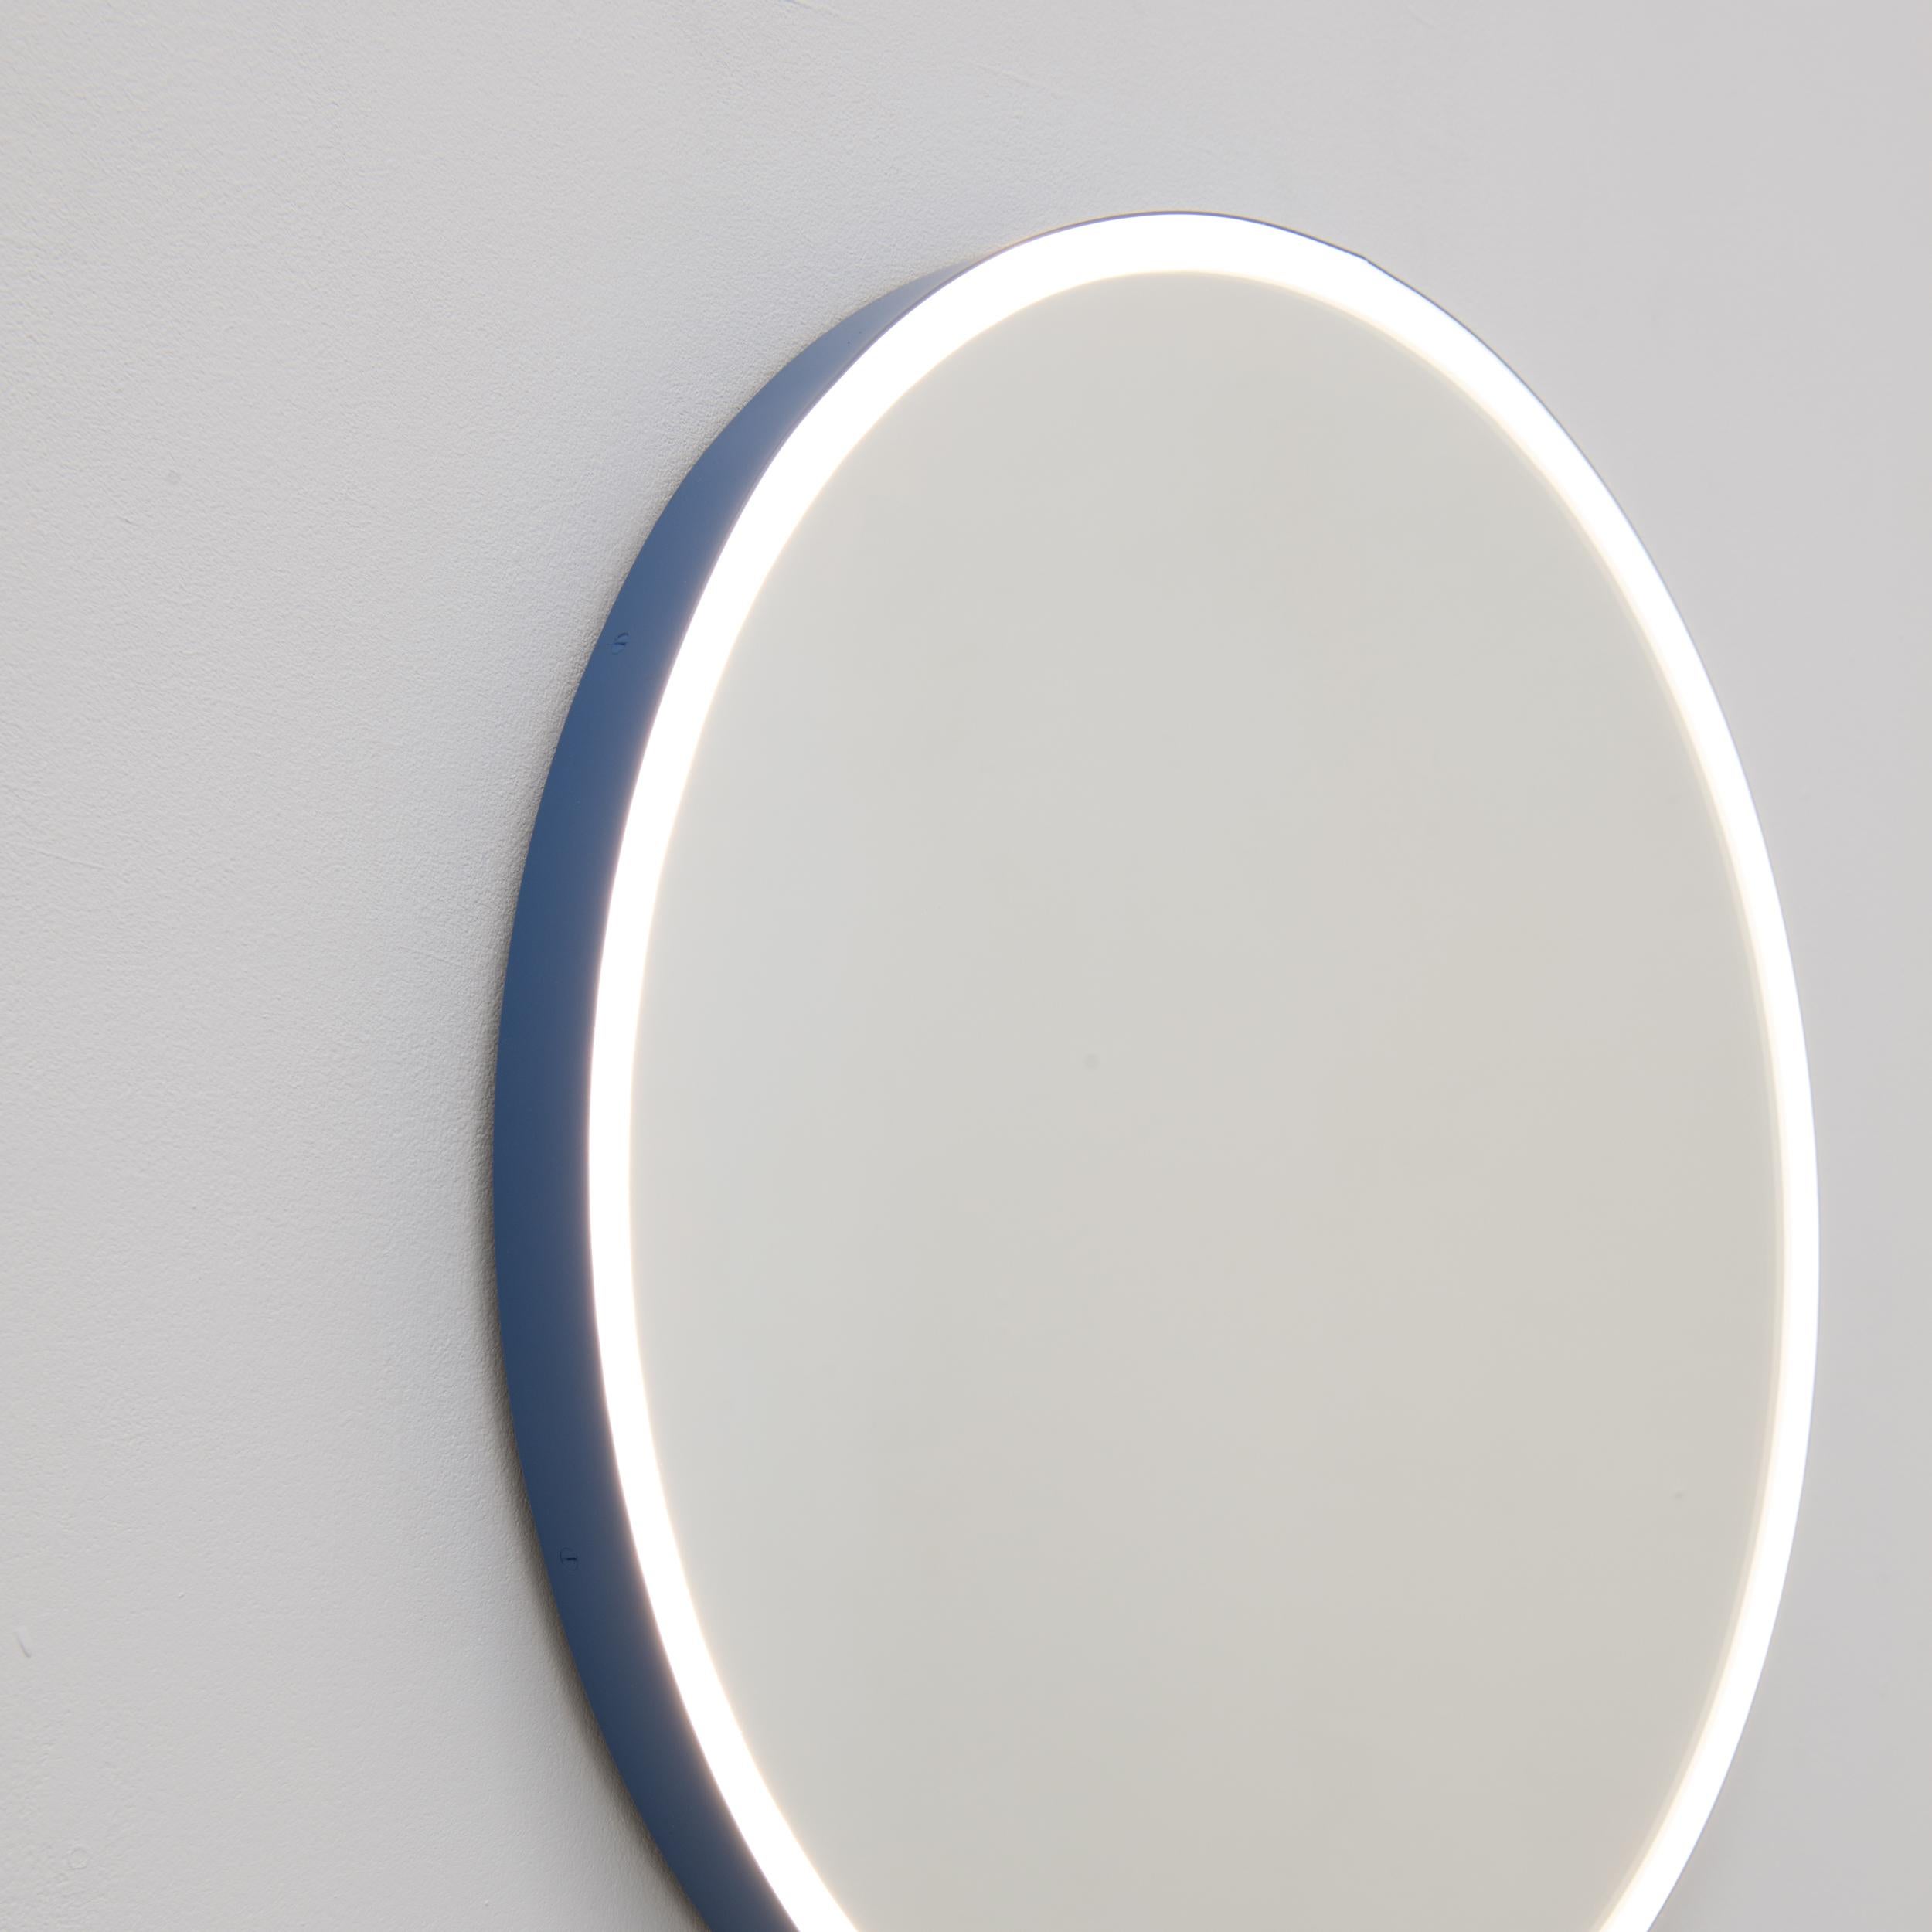 Contemporary Orbis Front Illuminated Round Modern Mirror with Blue Frame, Customisable, Large For Sale